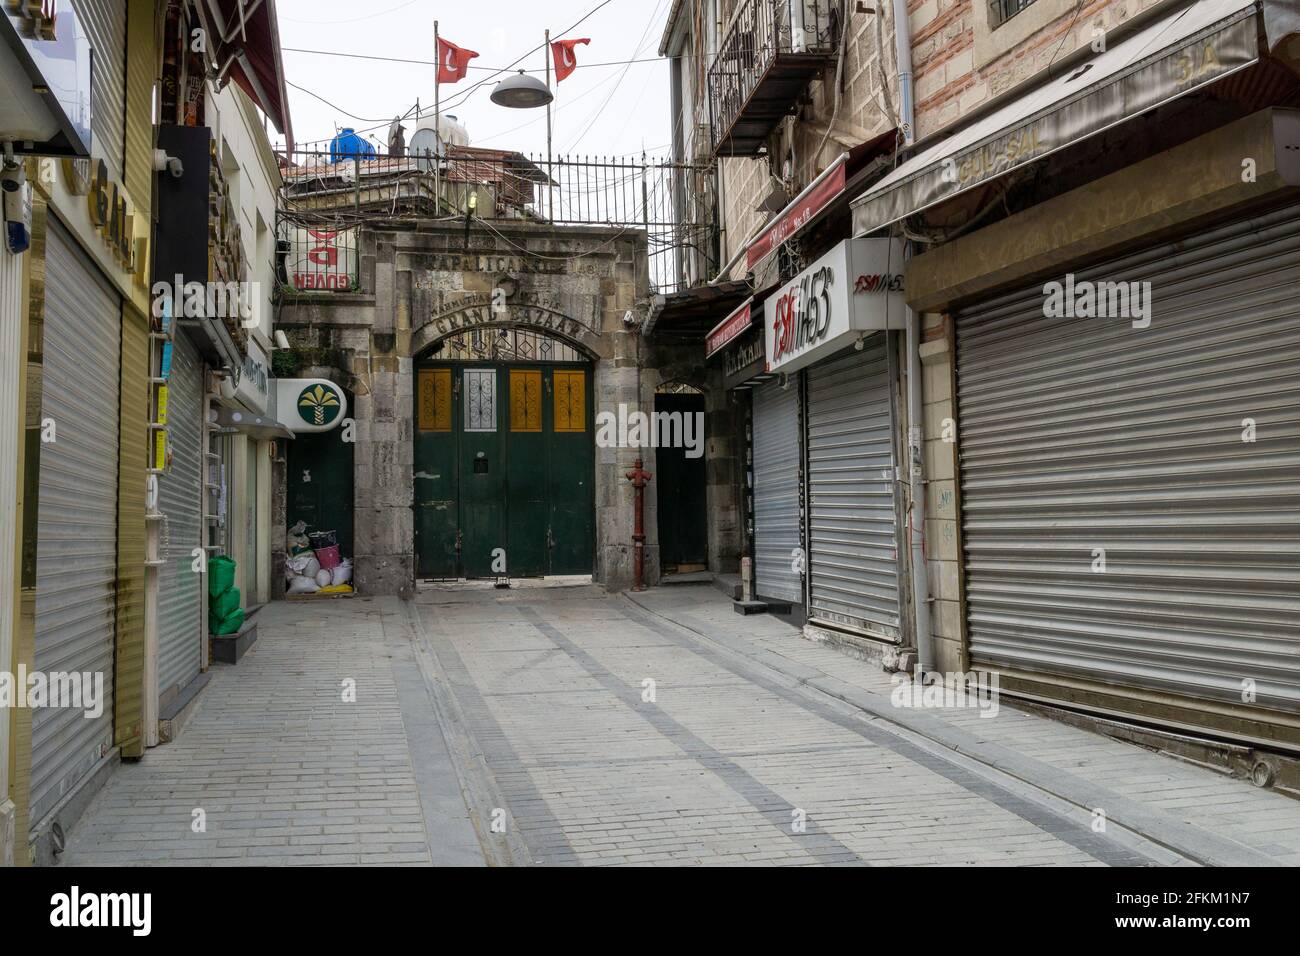 On the 3rd day of the curfew due to the coronavirus outbreak, the shops in historical Eminonu Square and Tahtakale districts were closed as in all of Stock Photo